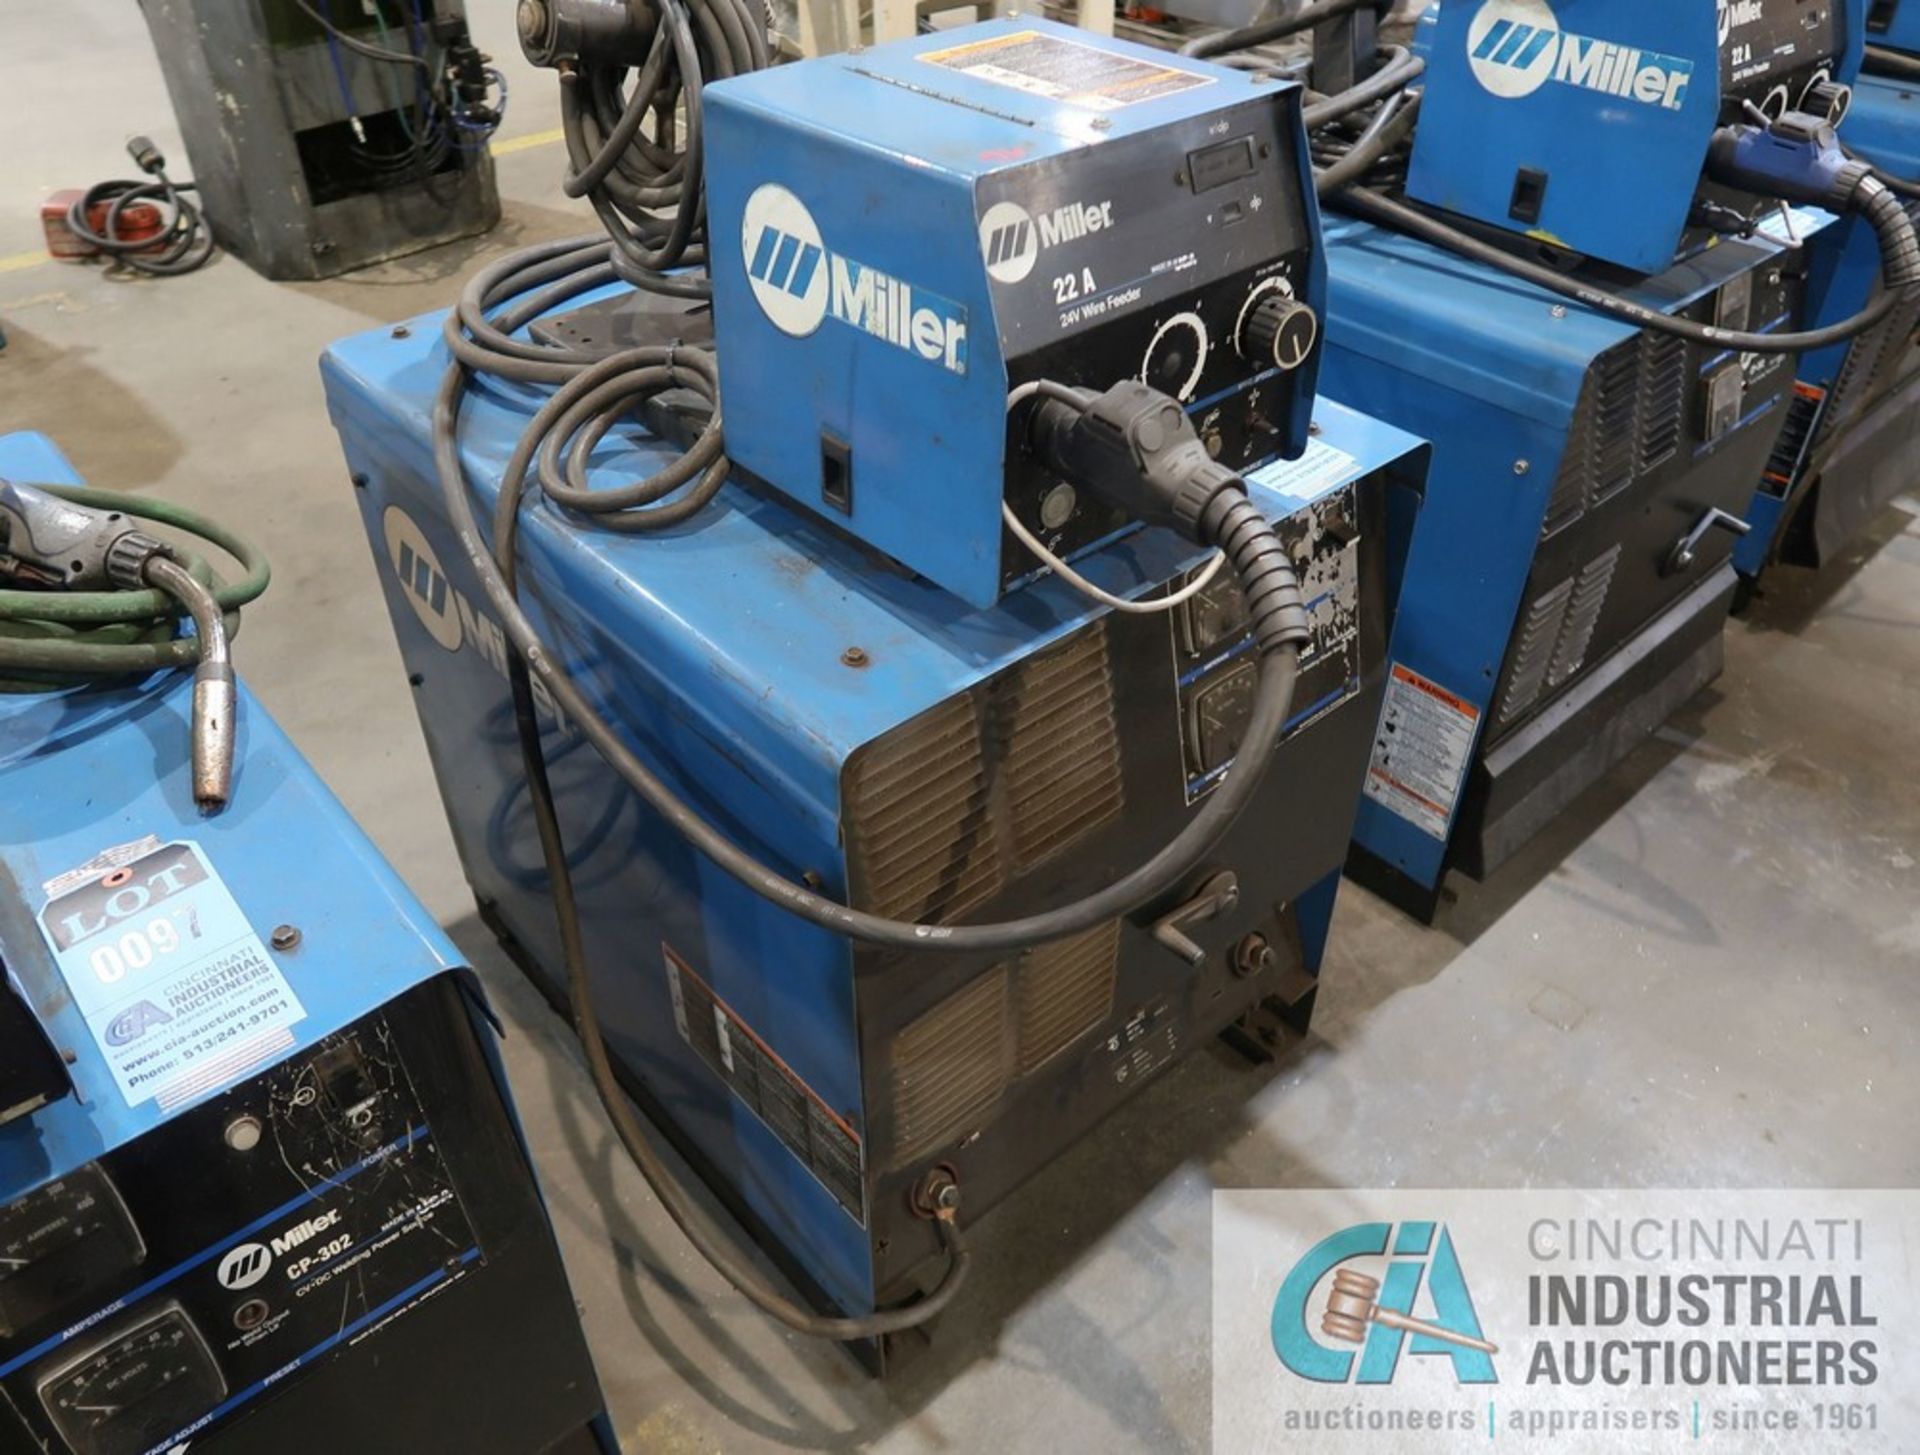 300 AMP MILLER CP-302 CV-DC WELDING POWER SOURCE; S/N LC666631, WITH MILLER 22A 24 VOLT WIRE FEEDER - Image 2 of 6